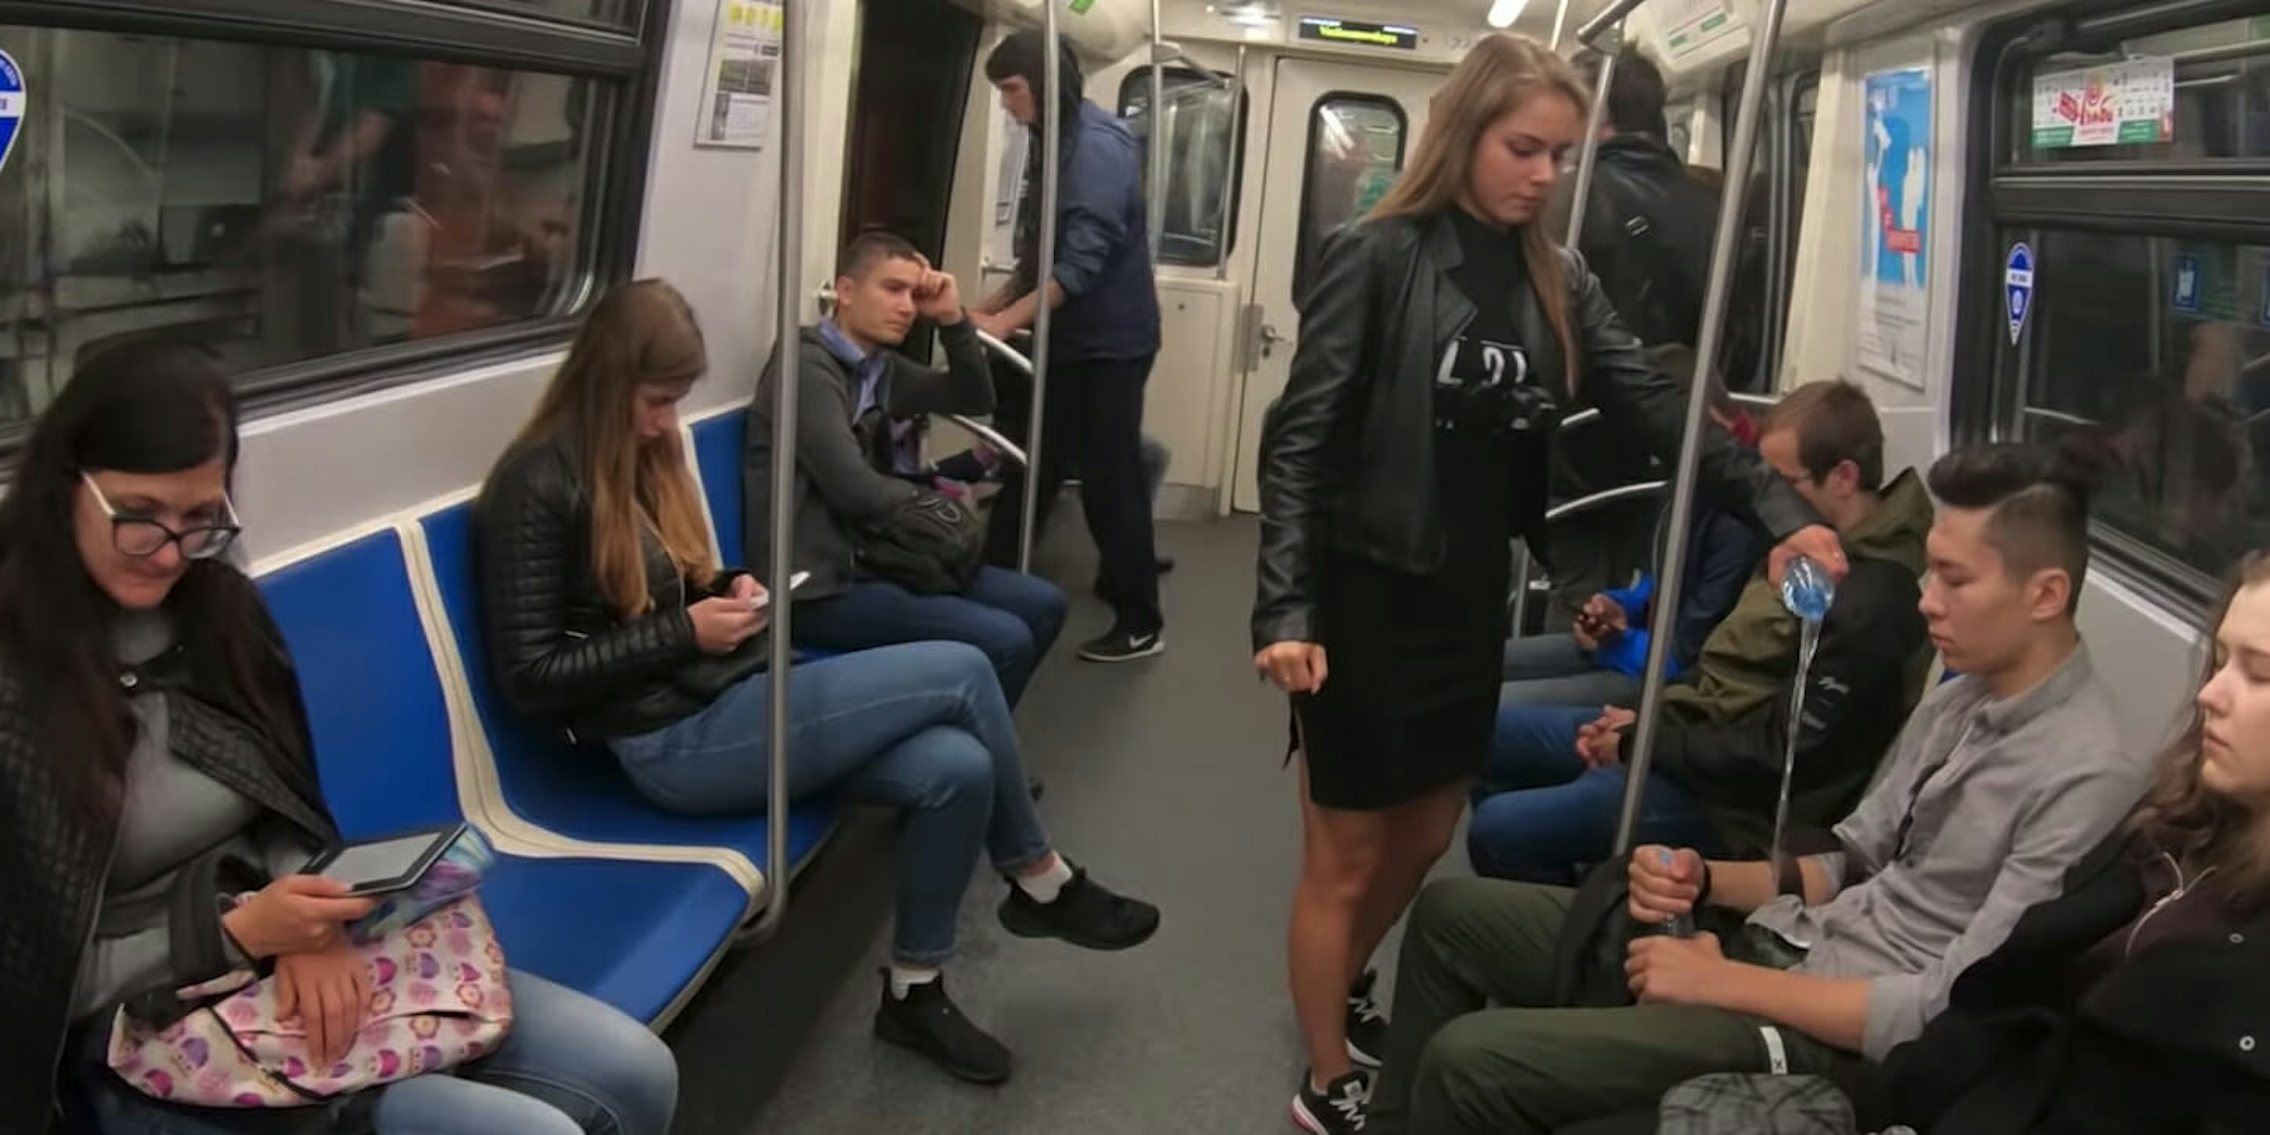 A video allegedly shows a Russian law student pouring bleach into the laps of manspreaders.